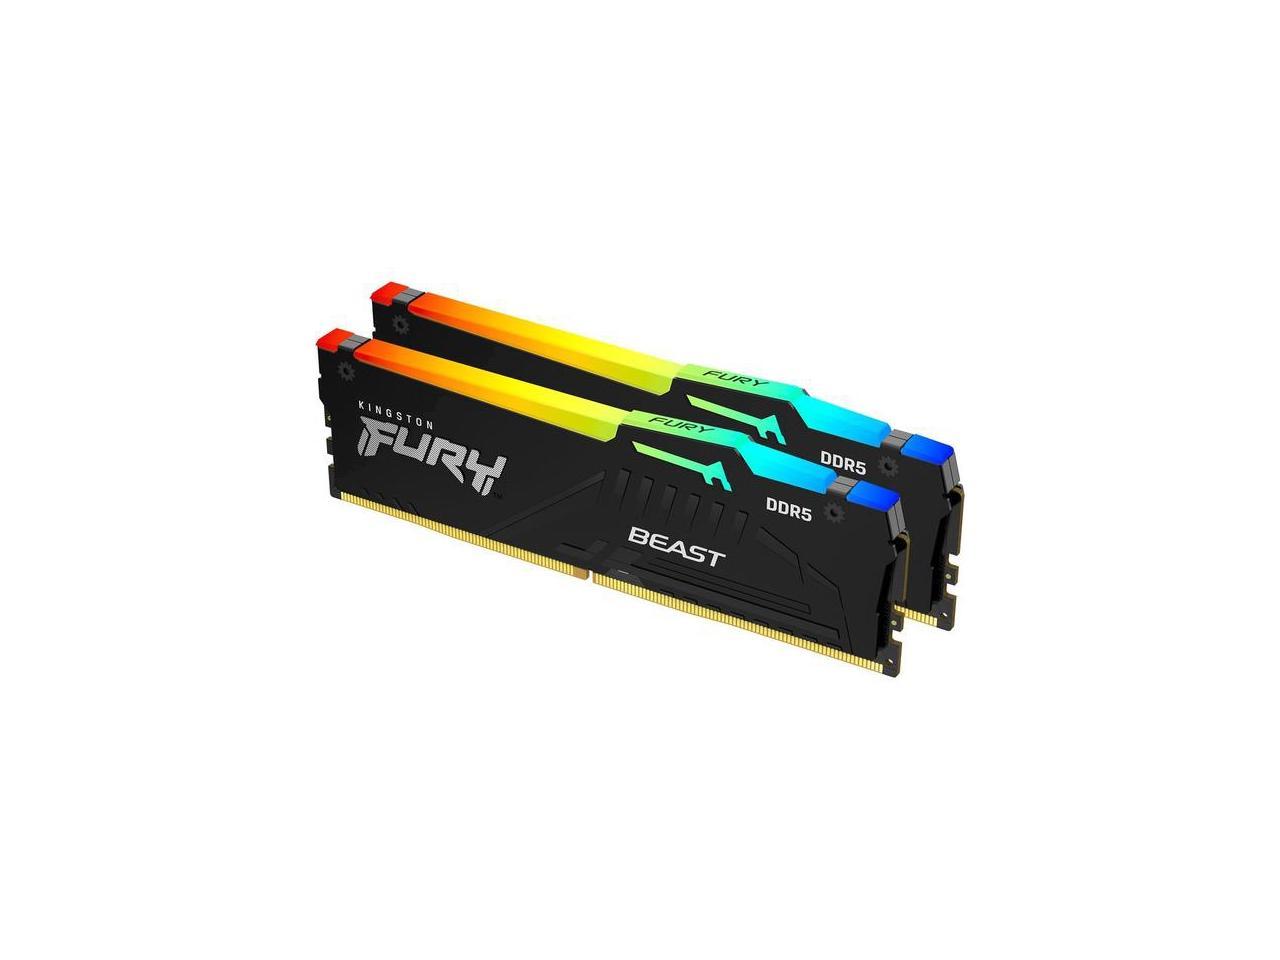 KINGSTON 32GB 5200MT/s DDR5 CL40 DIMM (Kit of 2) FURY Beast RGB for Game PC, AMD EXPO